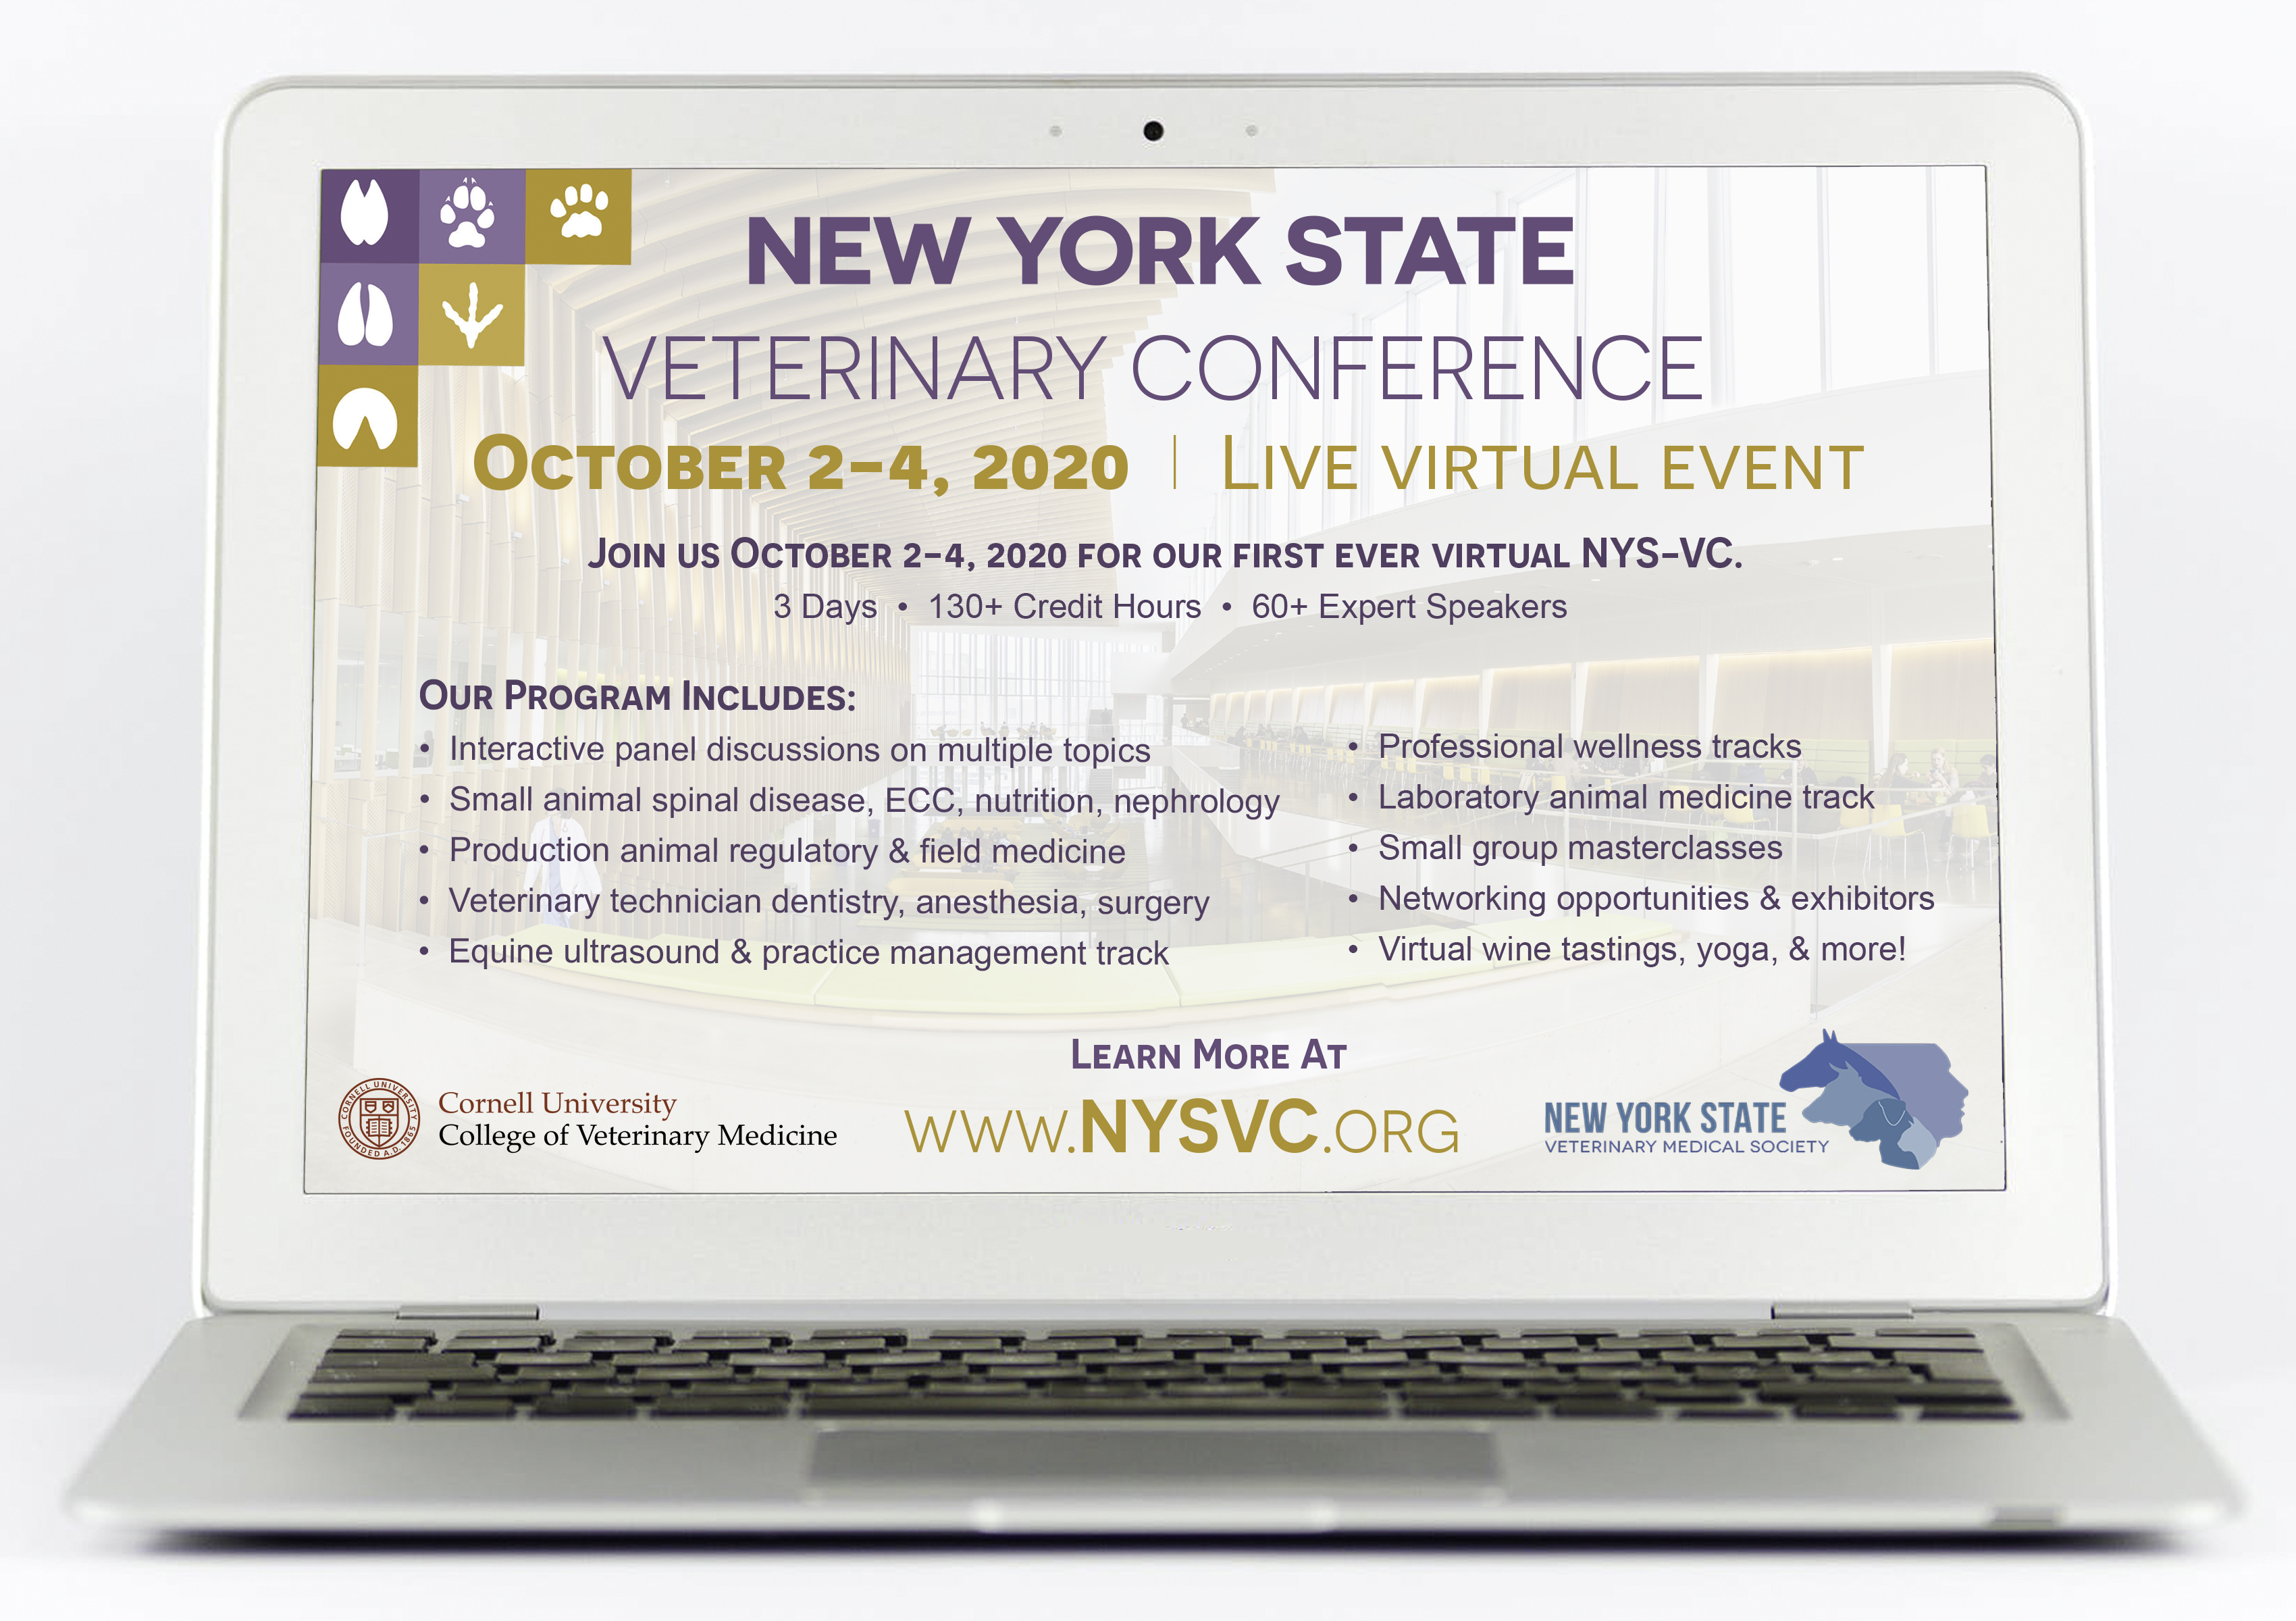  Cornell University College of Veterinary Medicine and the New York State Veterinary Medical Society